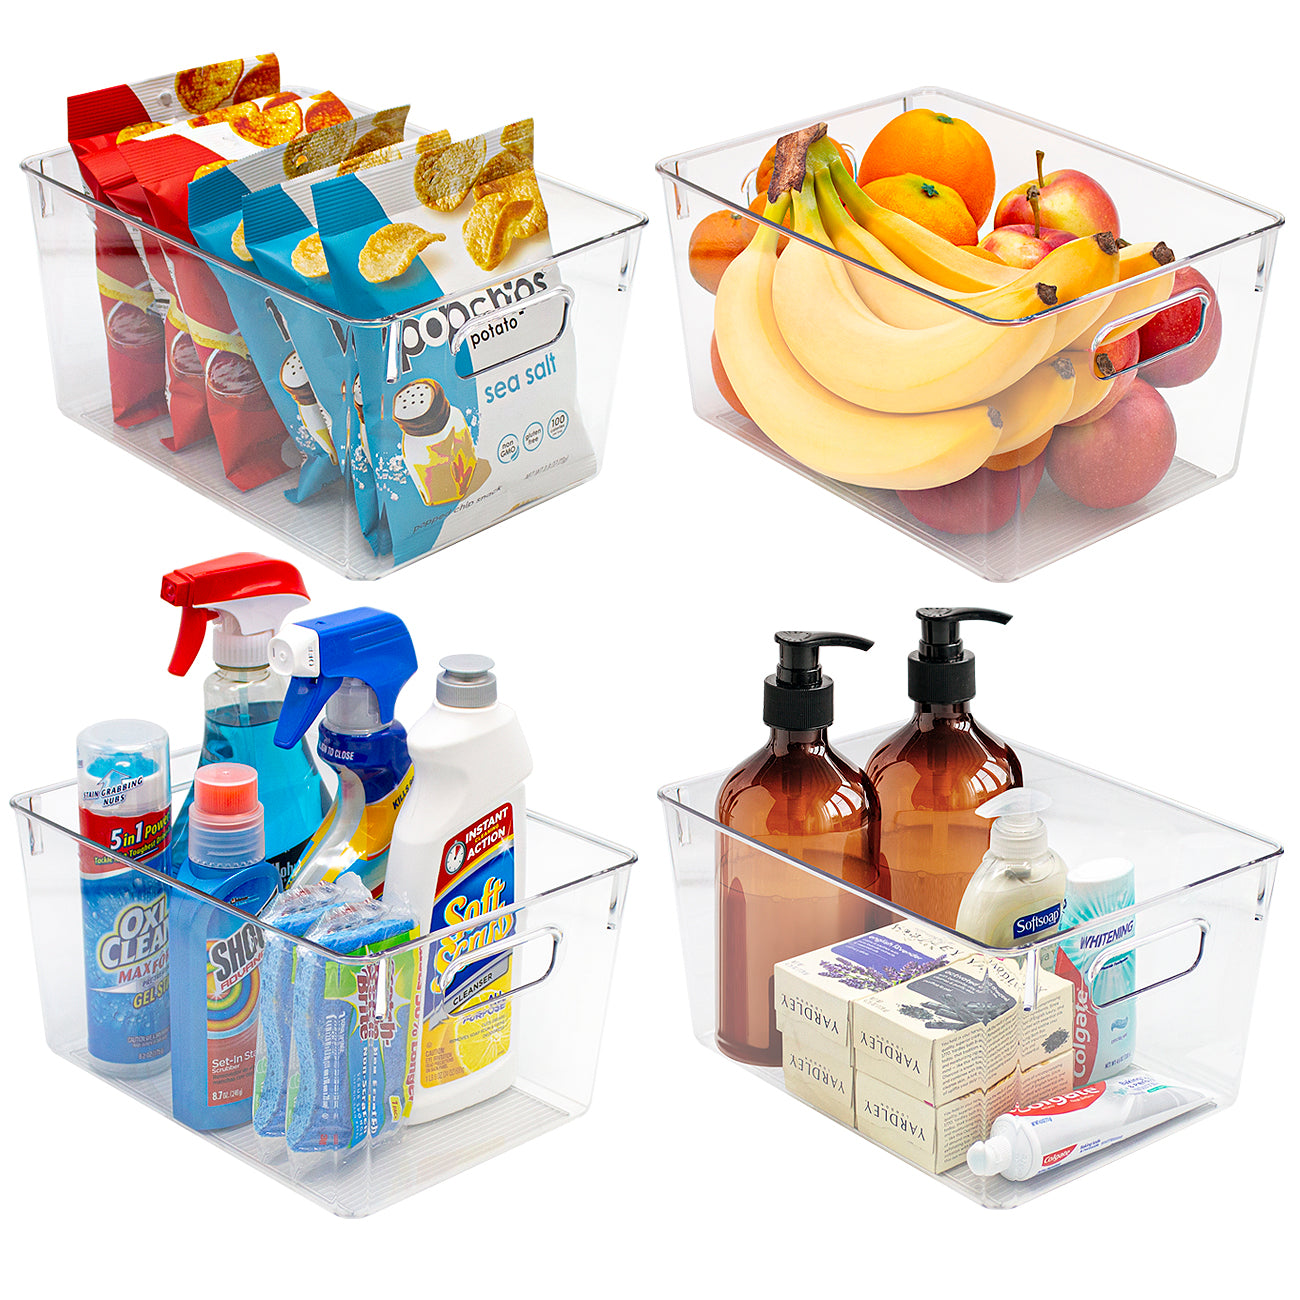 Sorbus Fridge Drawers - Clear Stackable Pull Out Refrigerator Organizer  Bins (2 Pack, Medium)